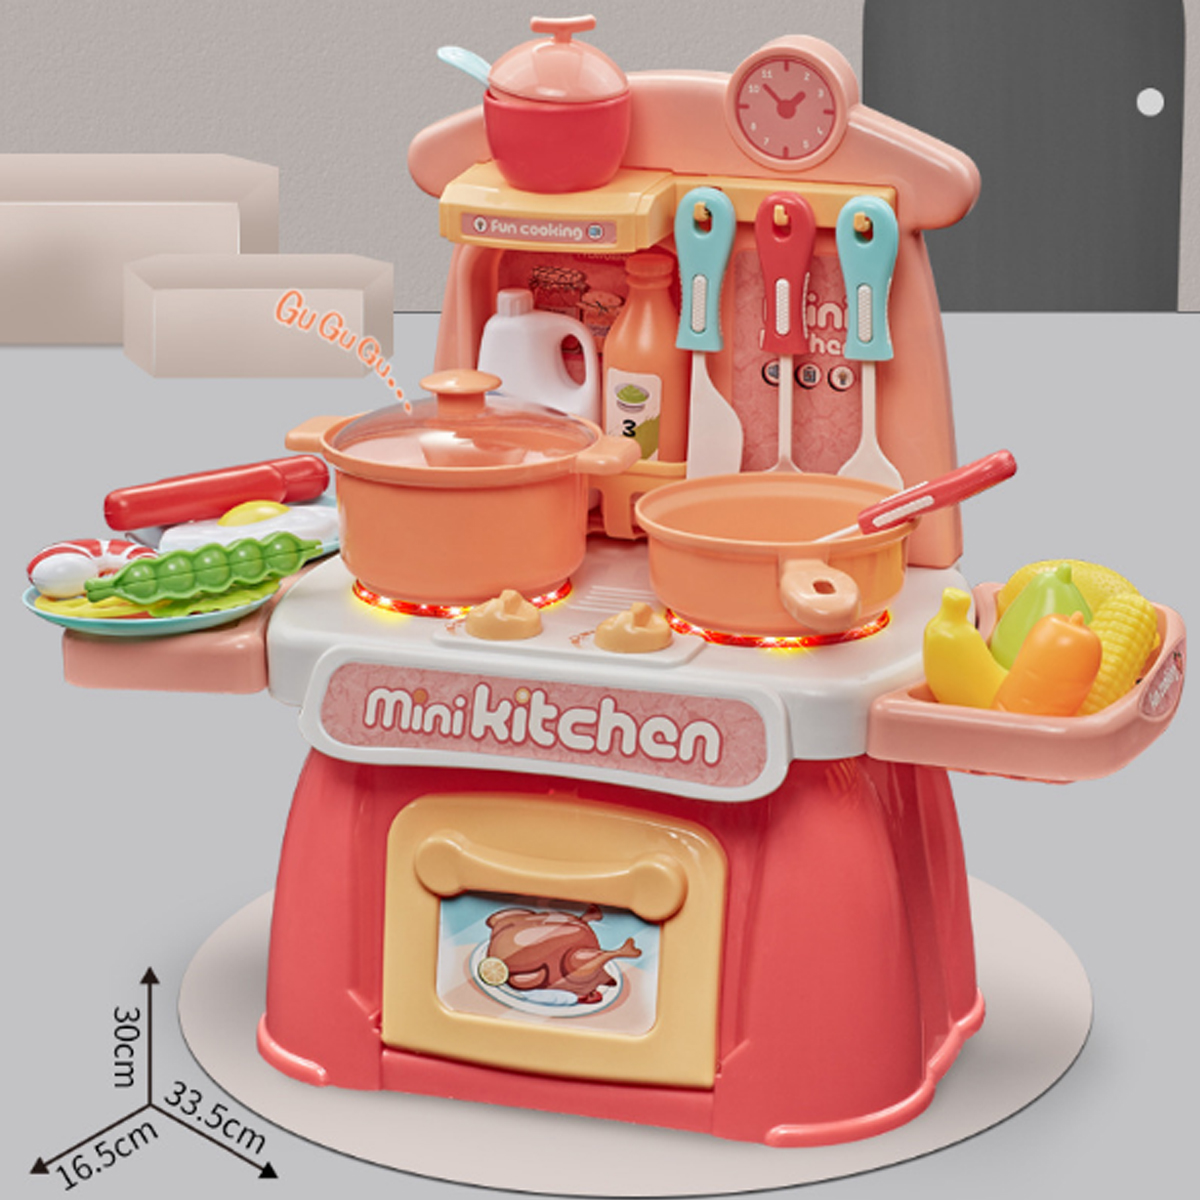 26-IN-1-Kitchen-Playset-Multifunctional-Supermarket-Table-Toys-for-Childrens-Gifts-1617630-7